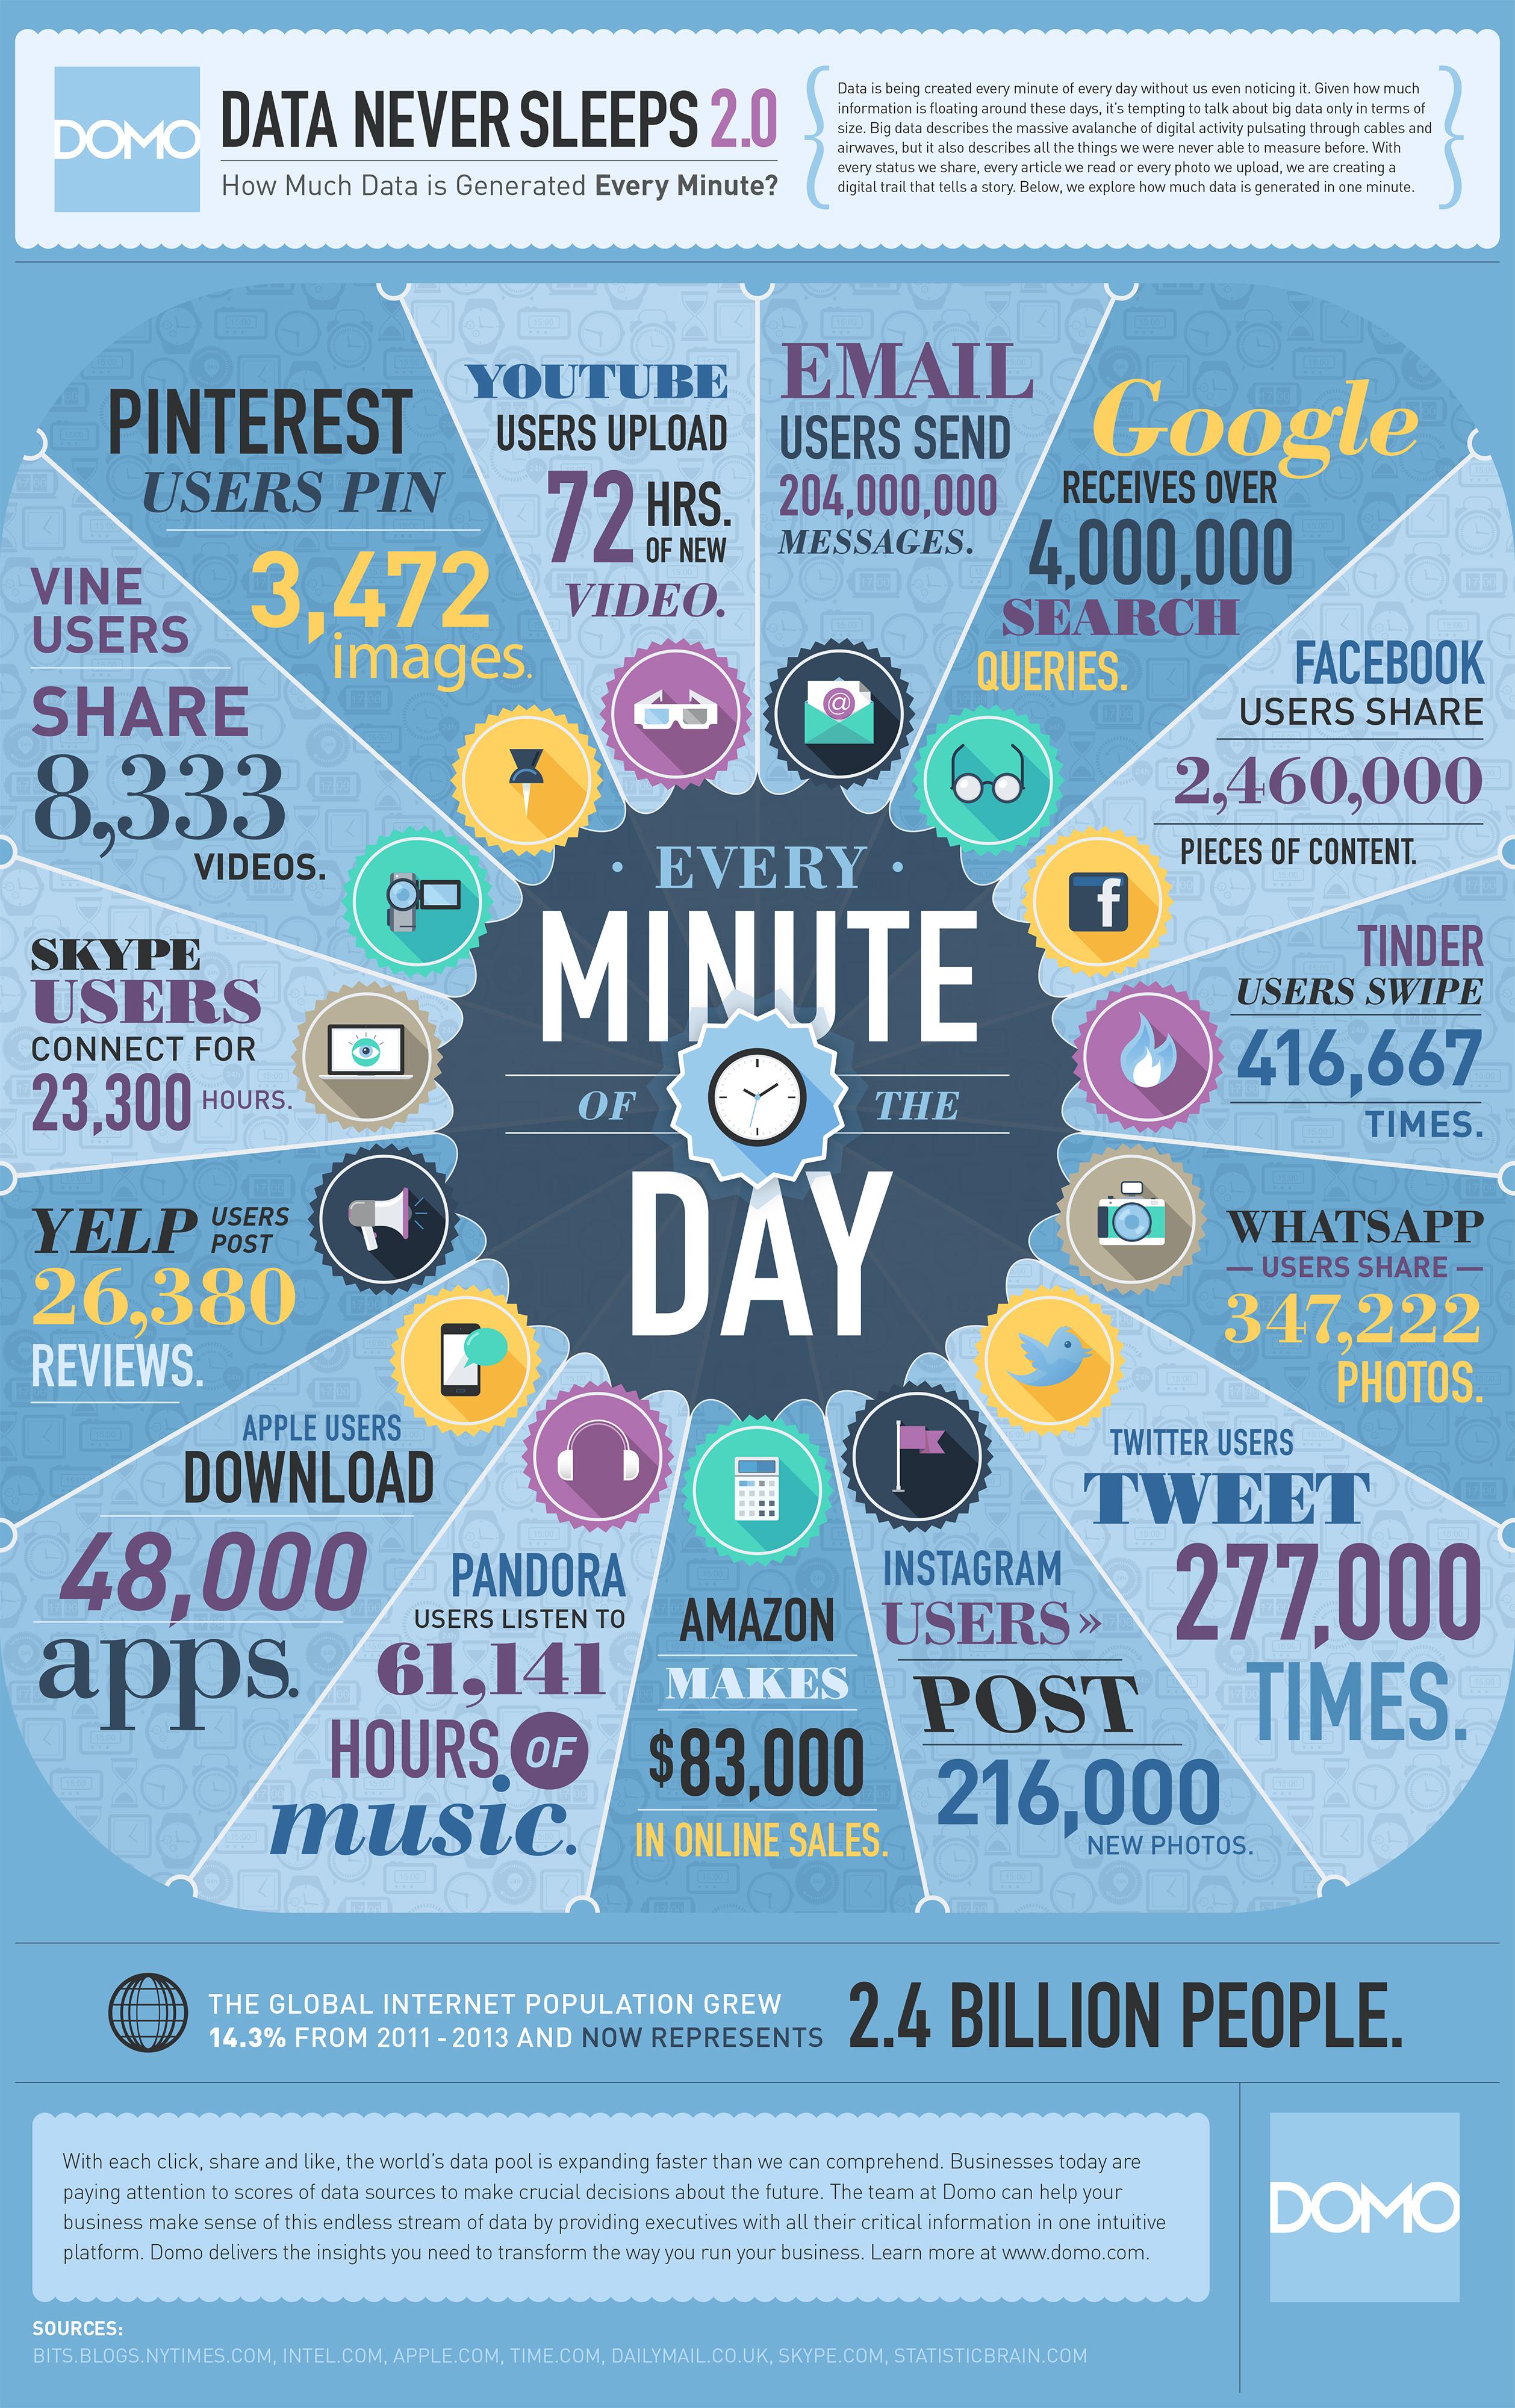 http://newstex.com/2014/07/12/the-data-explosion-in-2014-minute-by-minute-infographic/